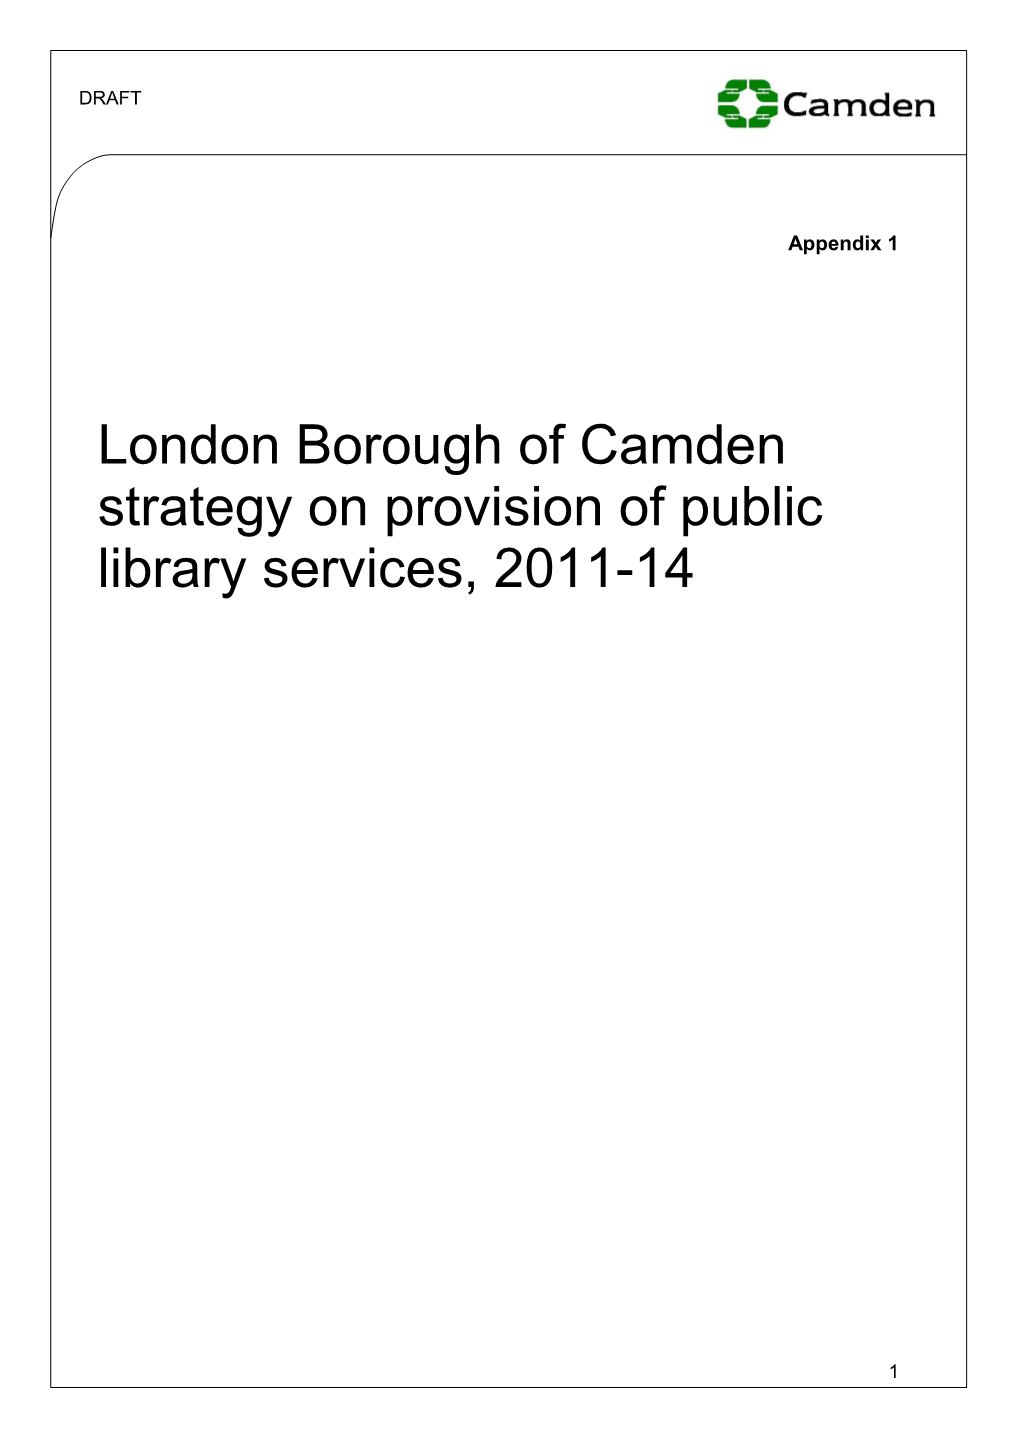 London Borough of Camden Strategy on Provision of Public Library Services, 2011-14